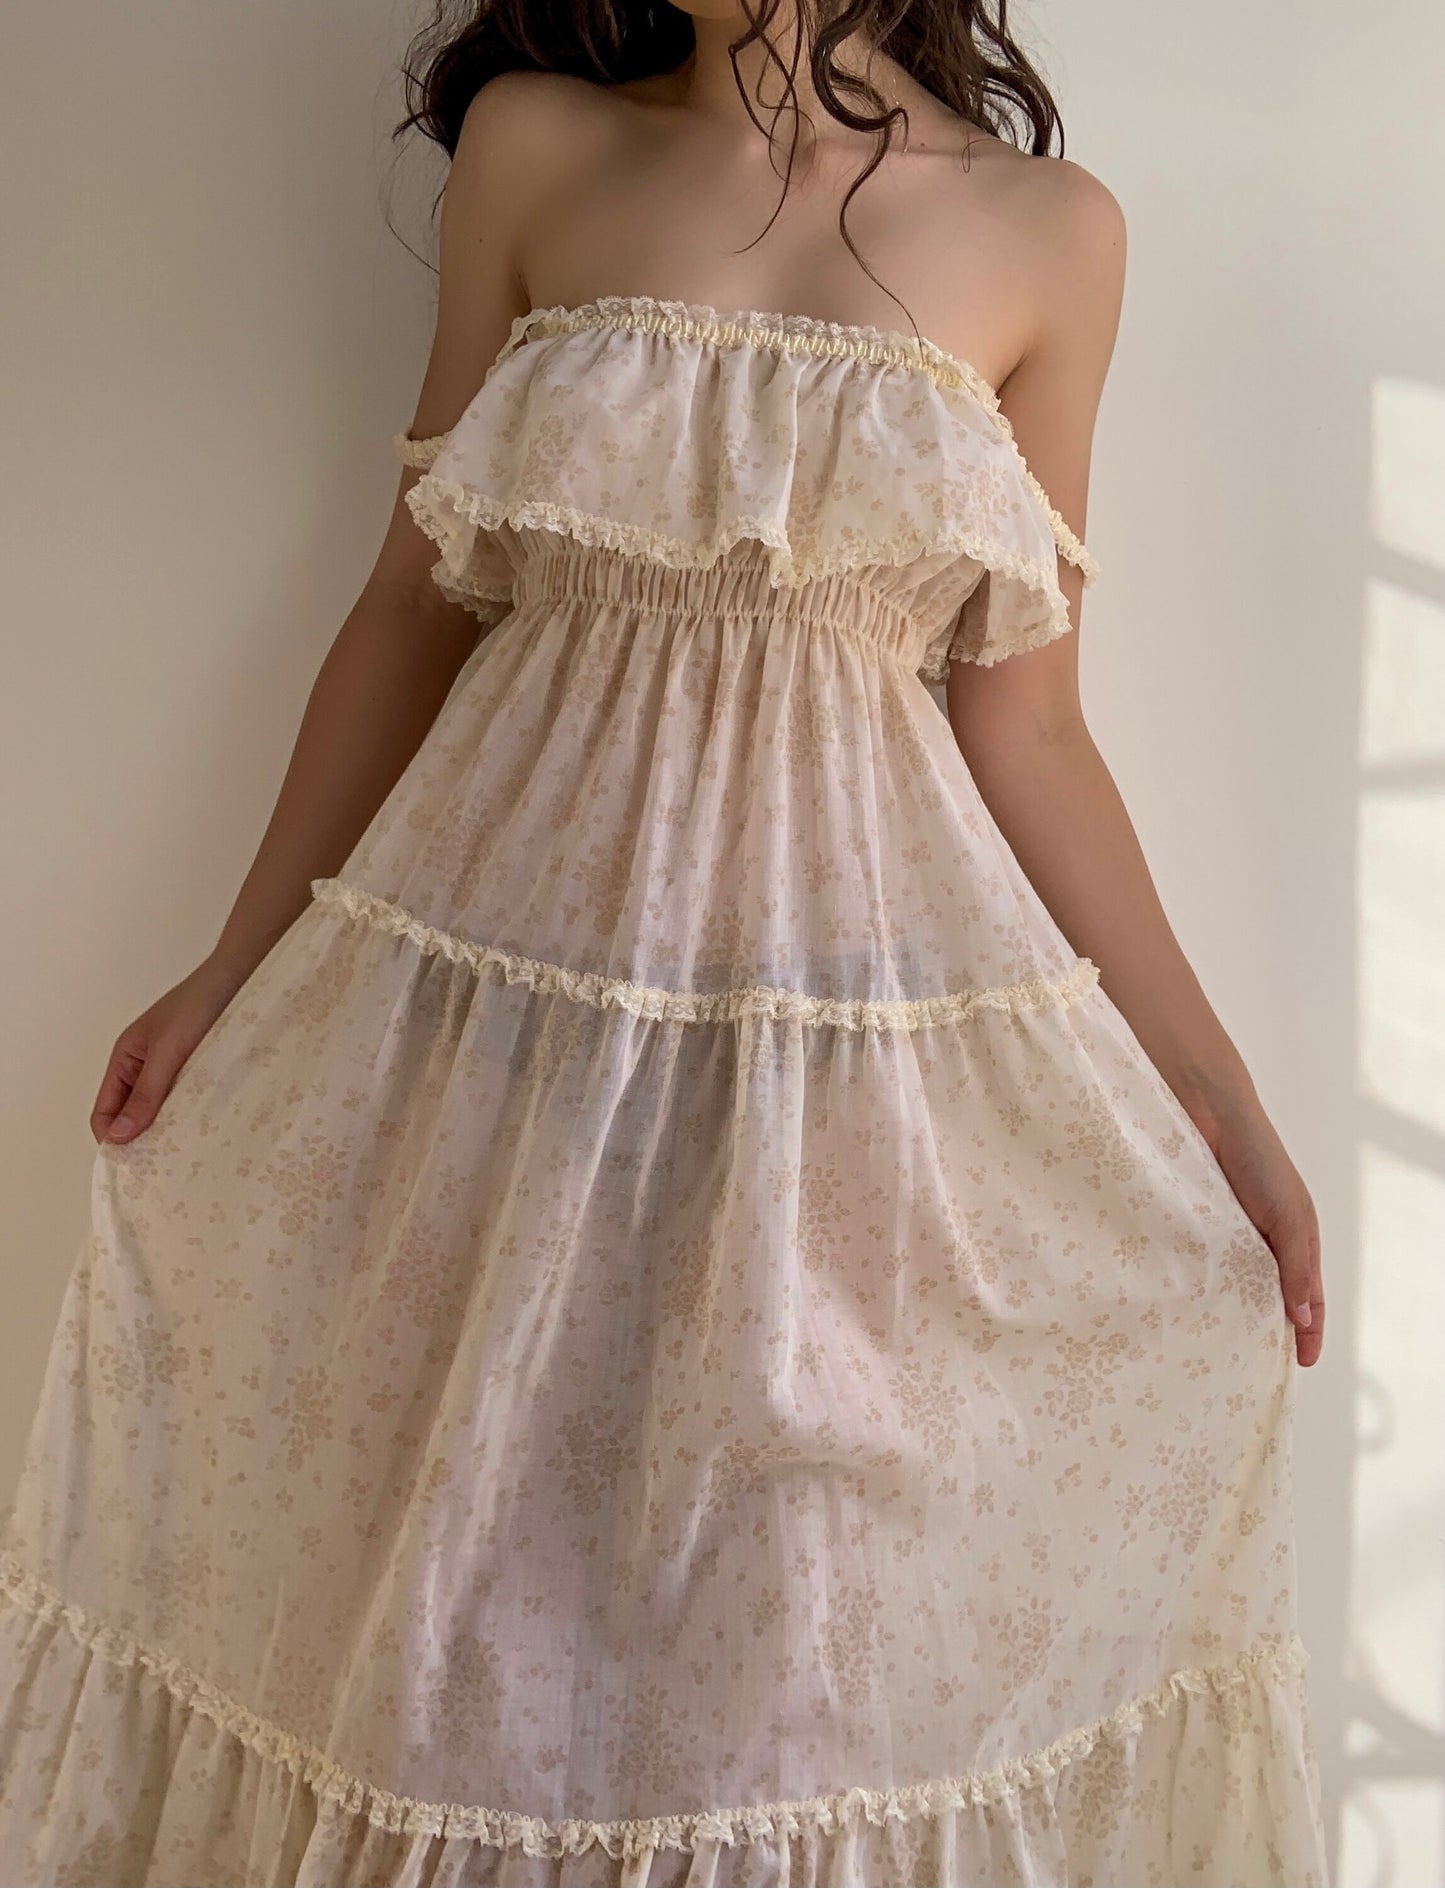 Cottage Ruffle Gown (XS/S/M)